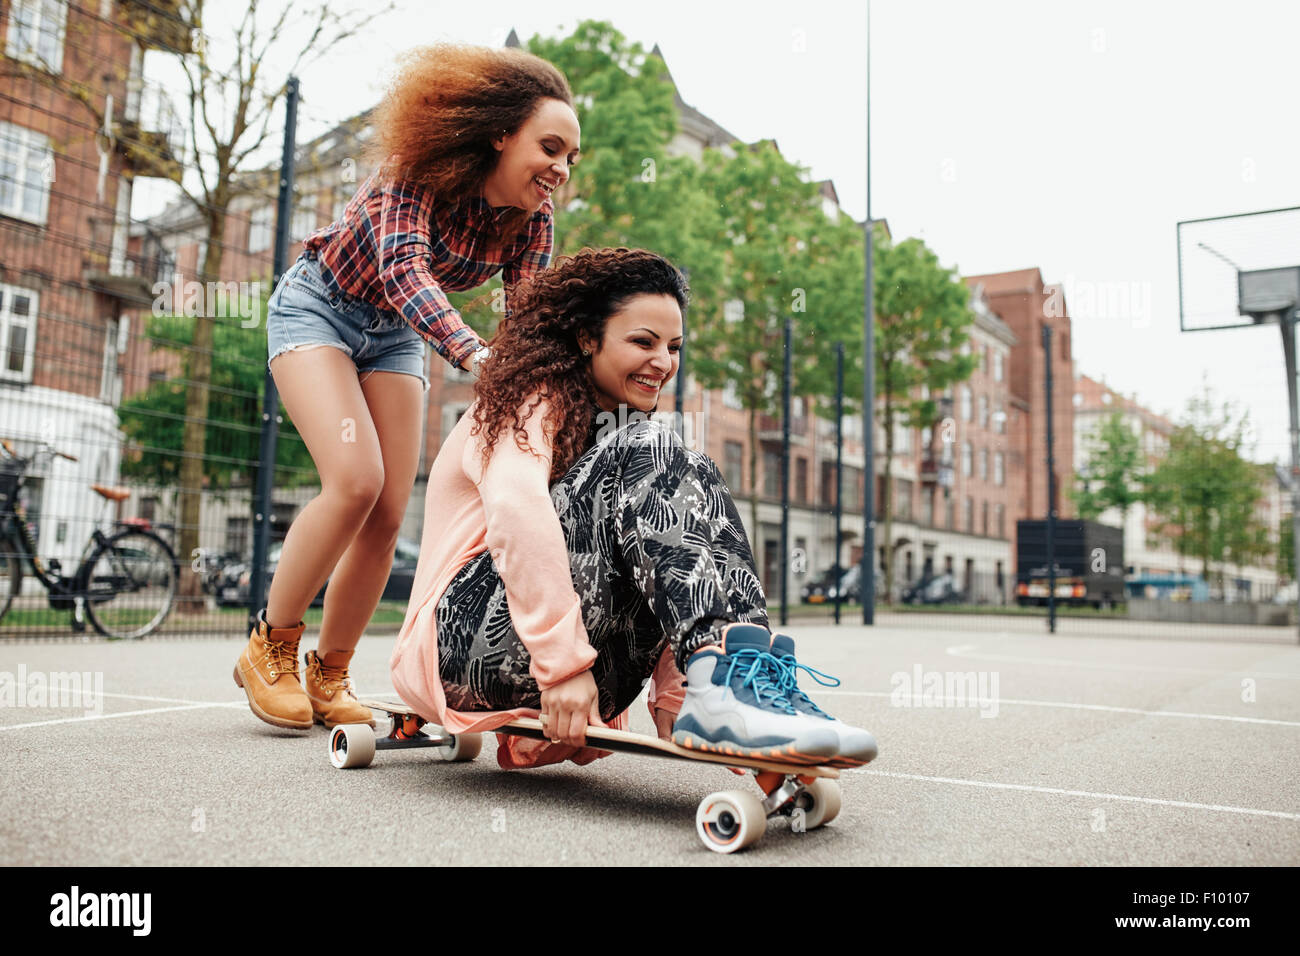 Happy young girl sitting on longboard being pushed by her friend. Young women enjoying skating outdoor. Stock Photo